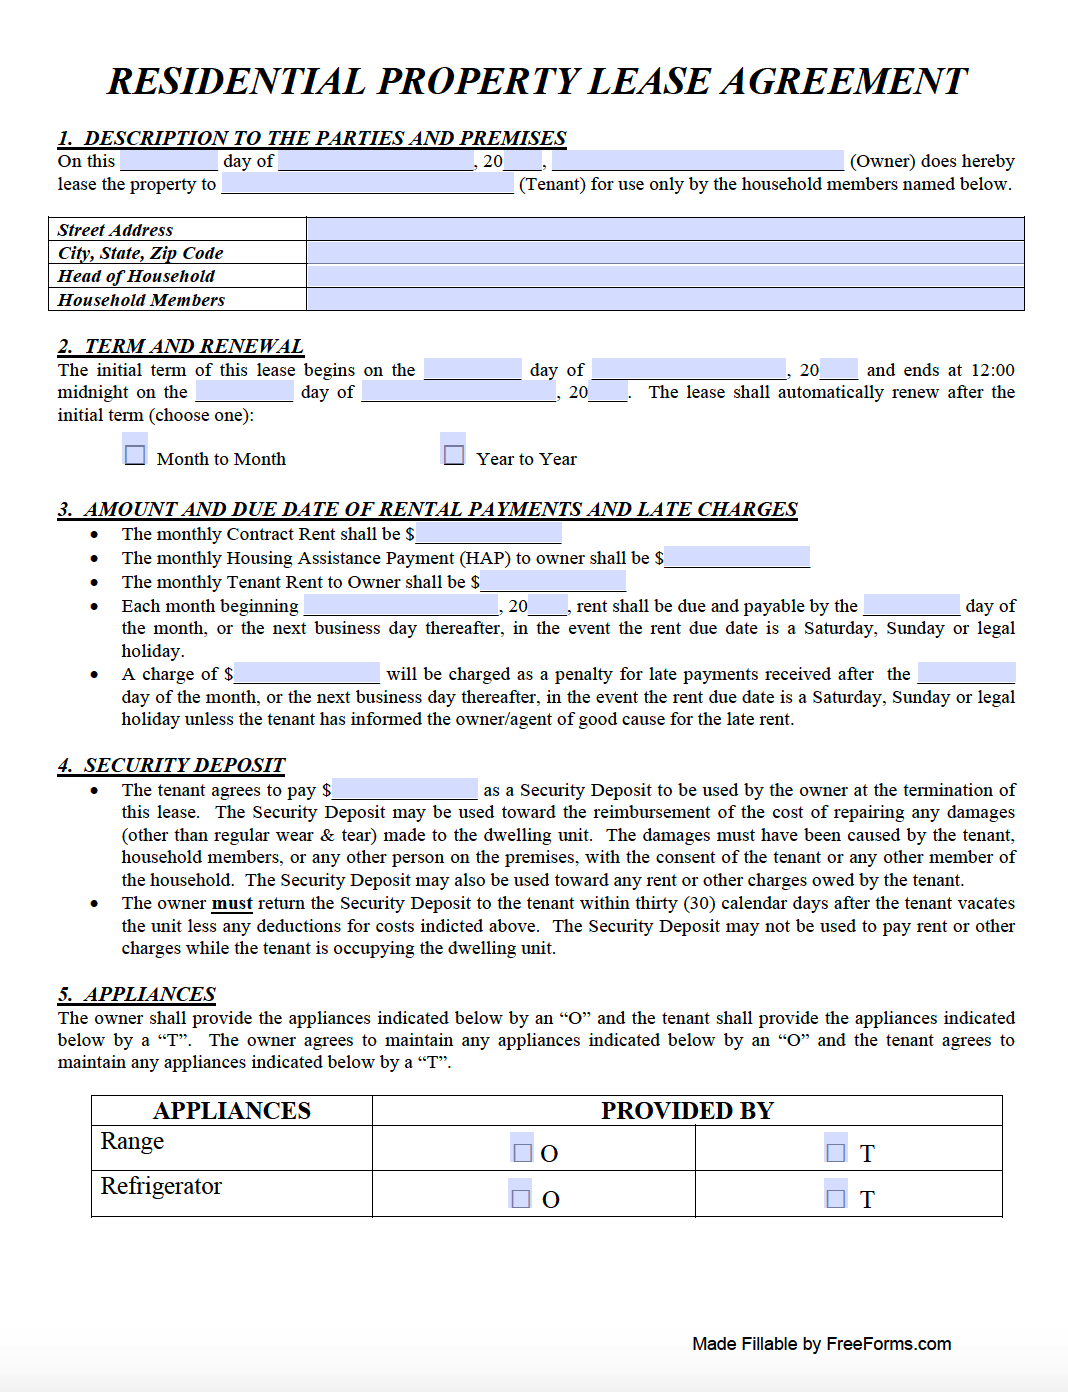 Ohio Residential Lease Agreement Template